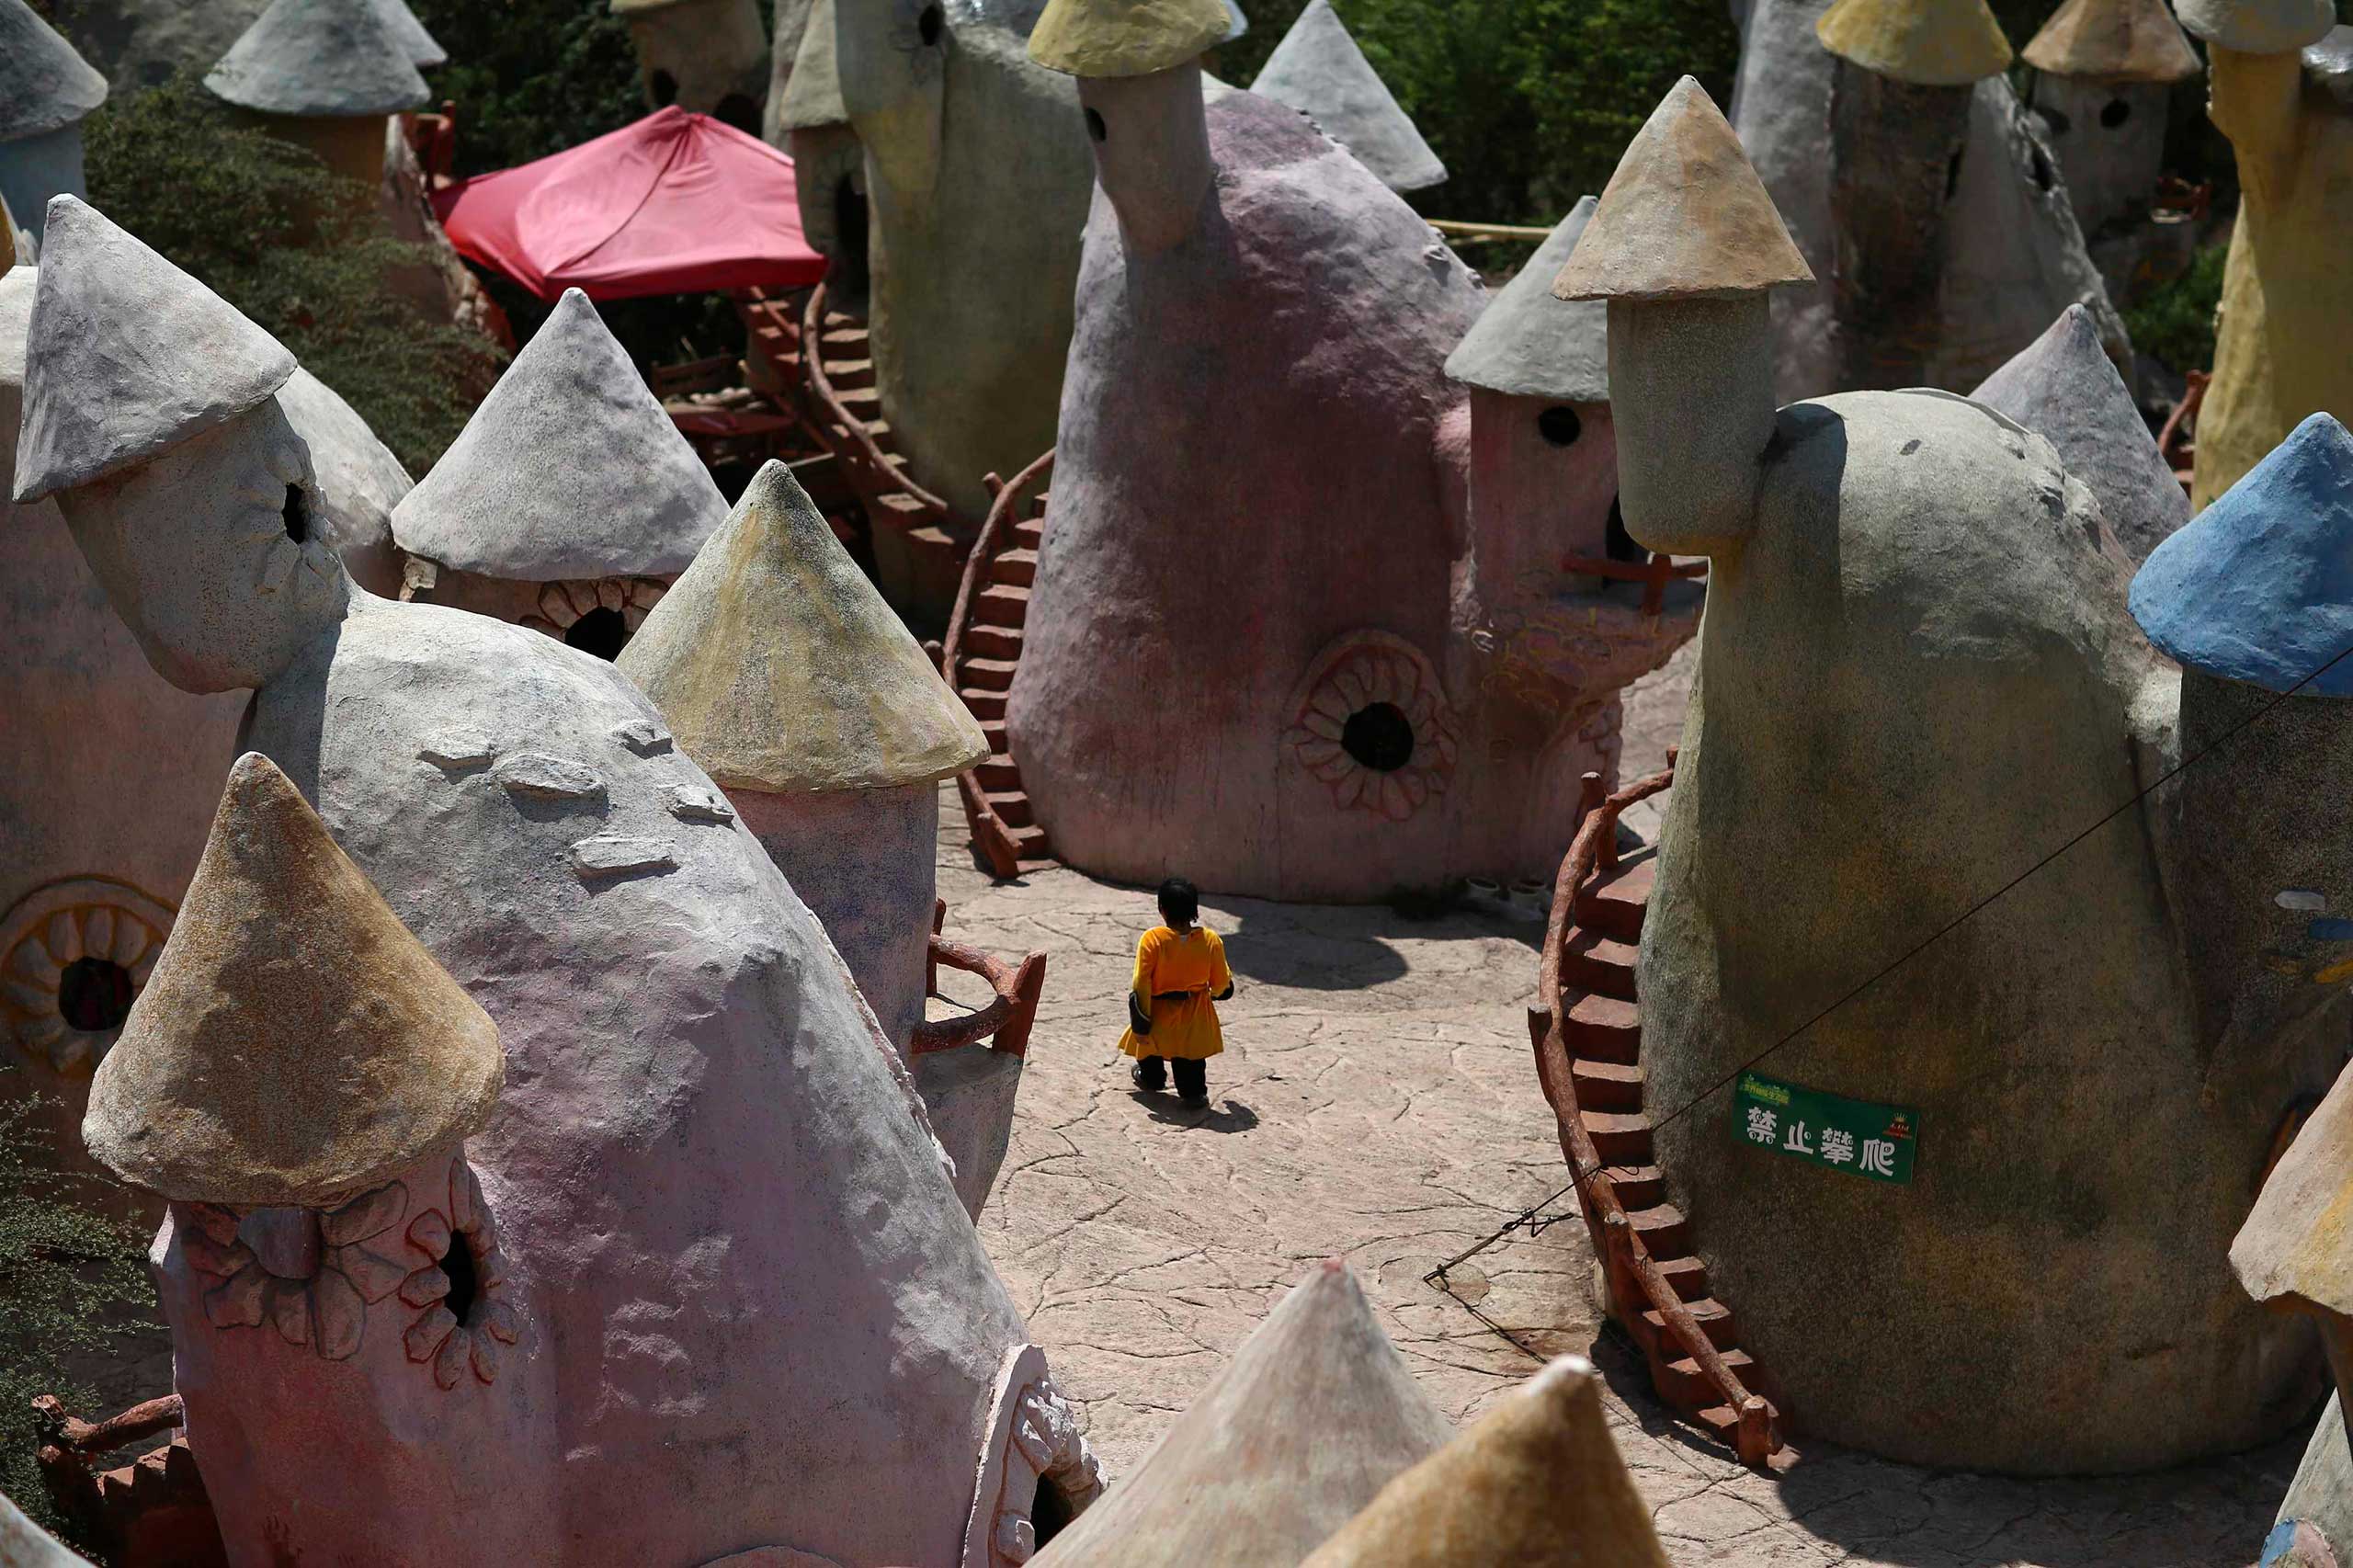 A dwarf walks in between mushroom-shaped houses after his performances in Kingdom of The Dwarves at Kunming World Butterflies Garden, Yunnan province, China, May 21, 2014.